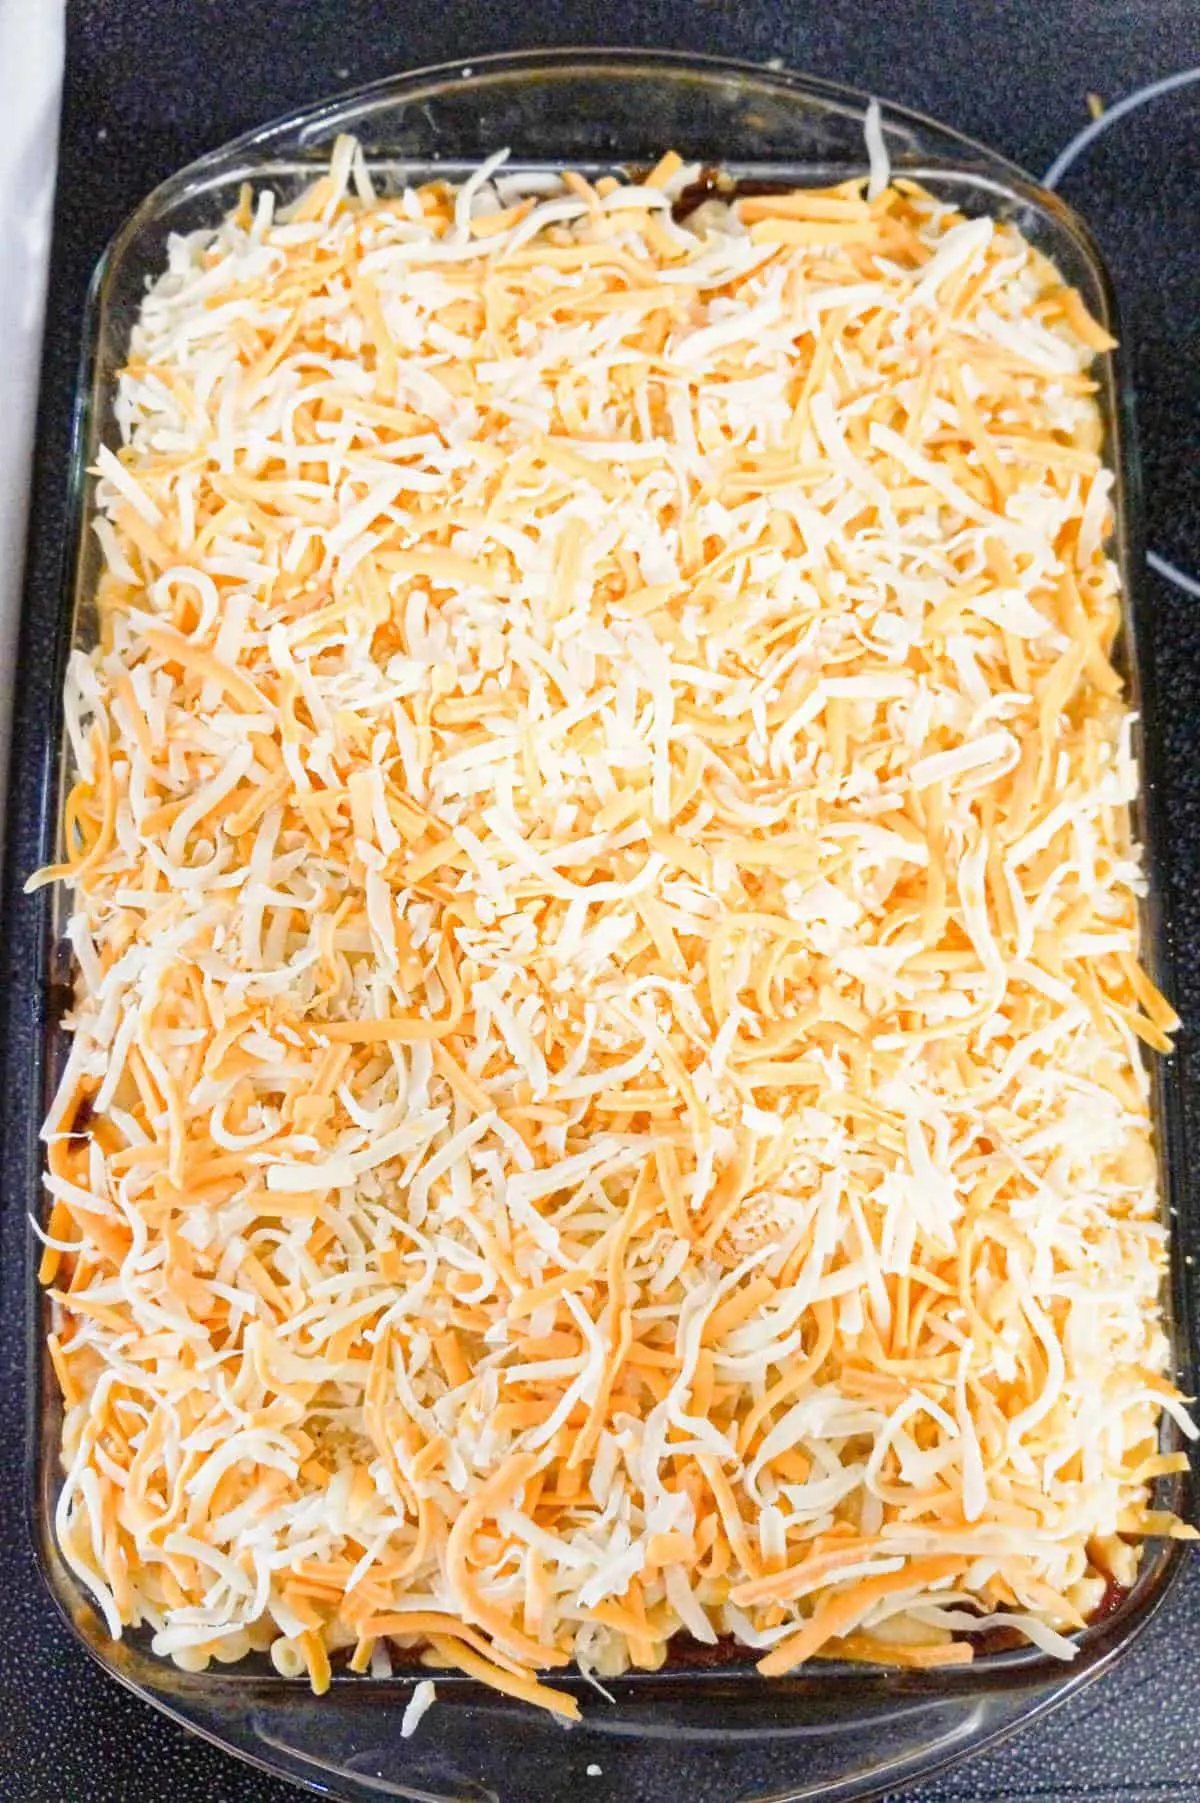 shredded cheese on top of macaroni in a baking dish